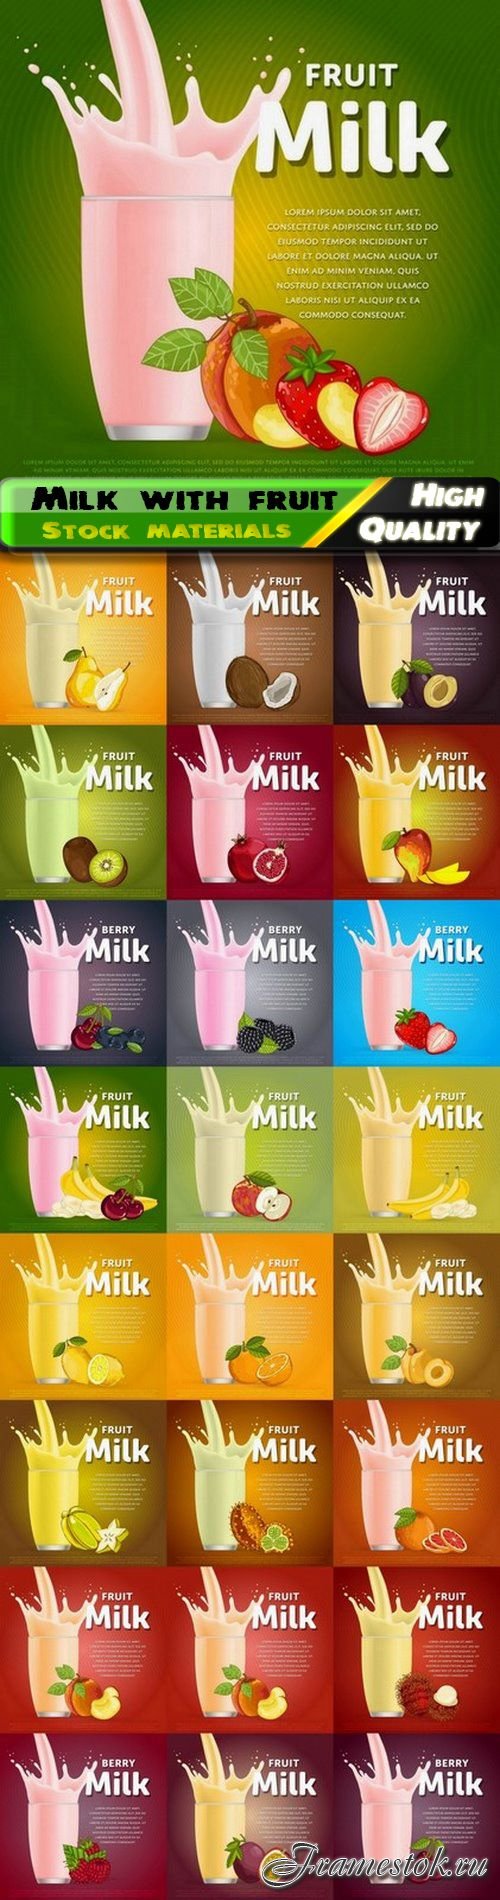 Glass of cow milk with realistic fruit - 25 Eps